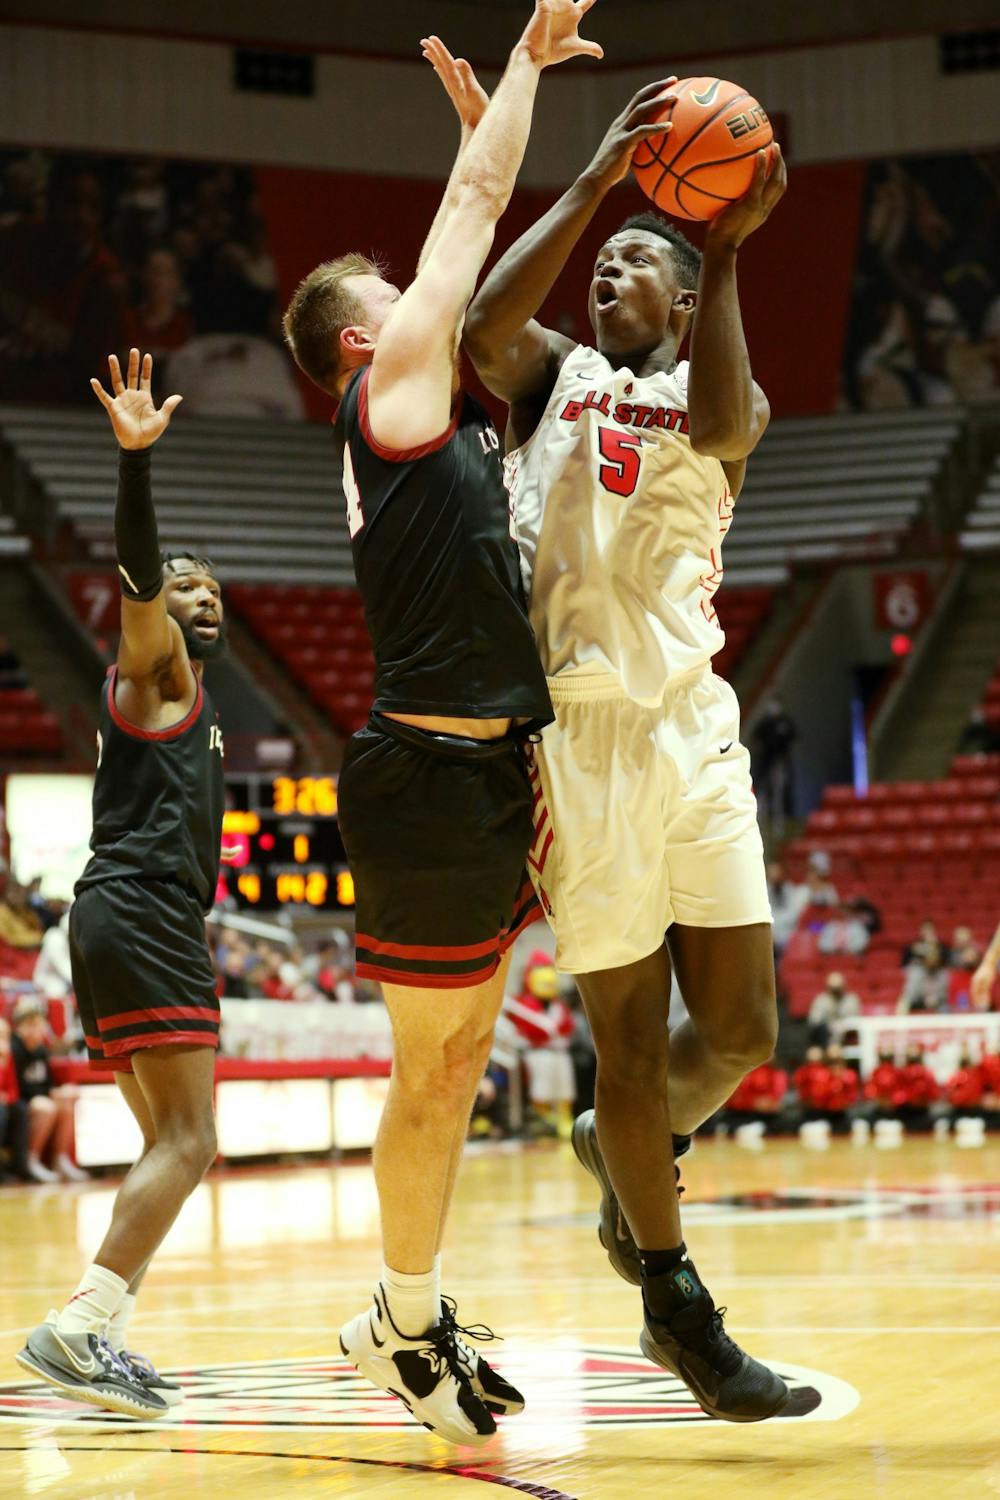 Sparks has career day, but missed opportunities result in Ball State’s loss against Akron